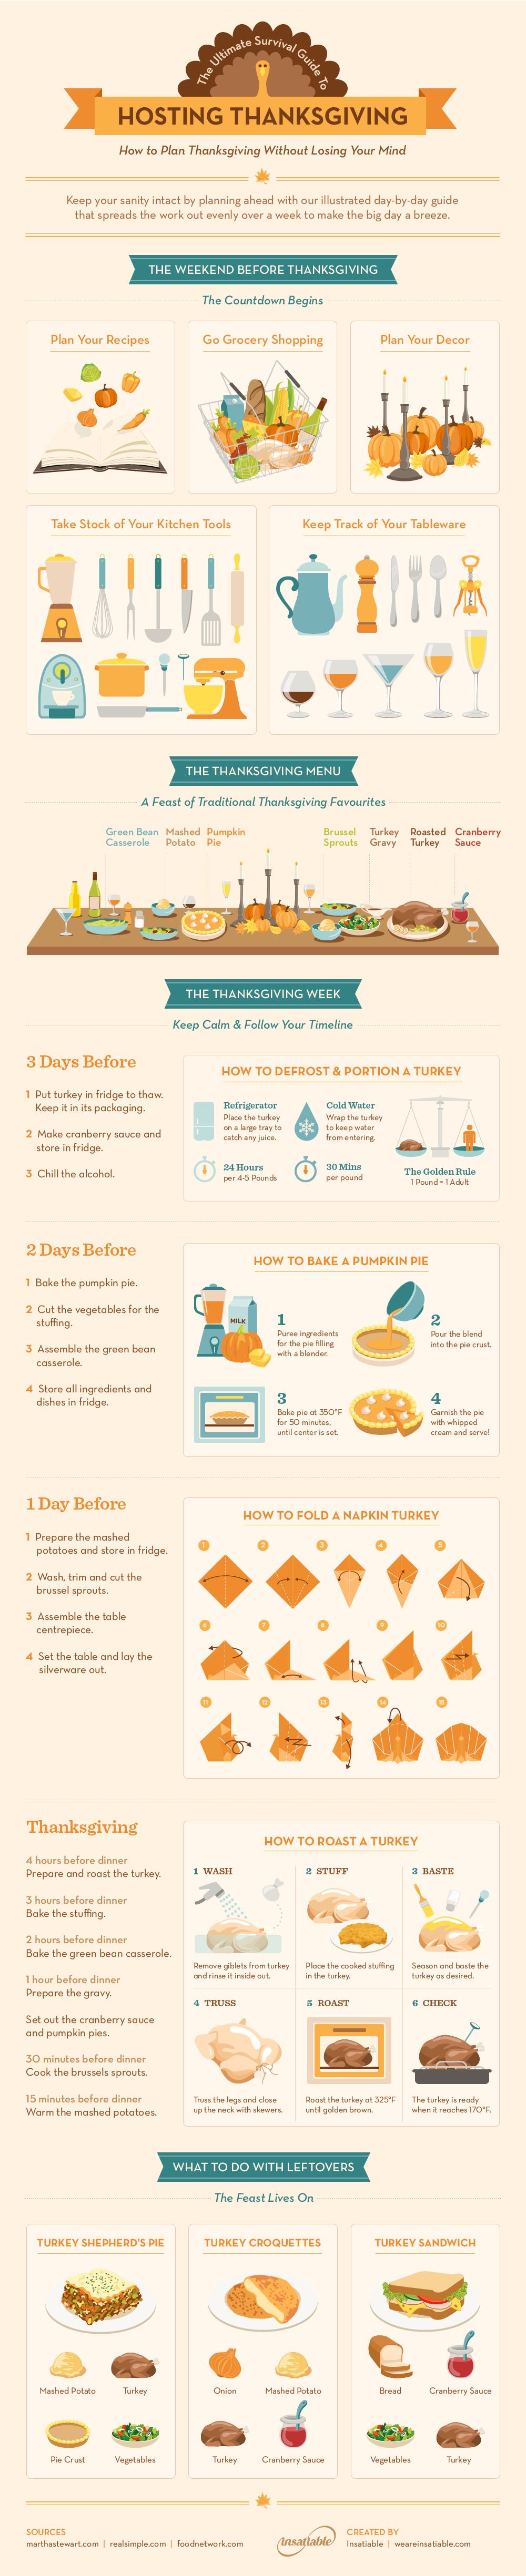 The Ultimate Survival Guide to Hosting Thanksgiving